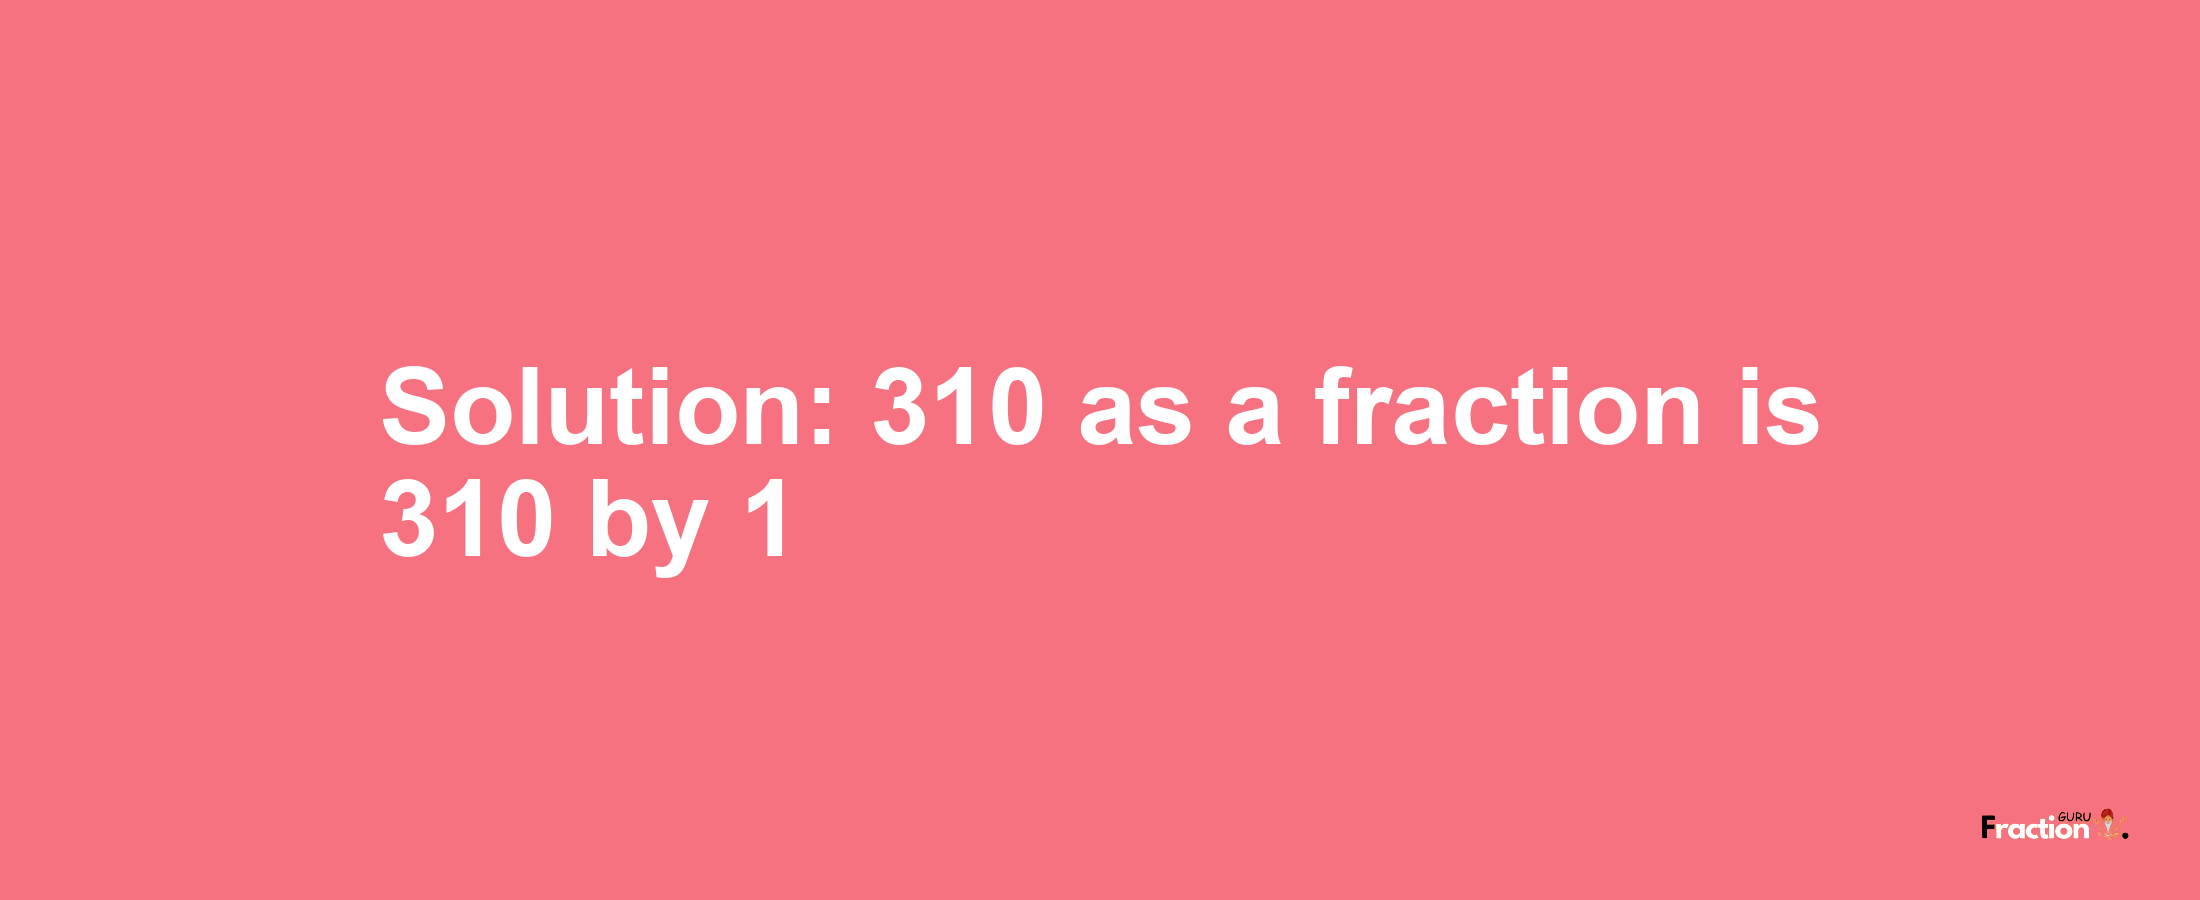 Solution:310 as a fraction is 310/1